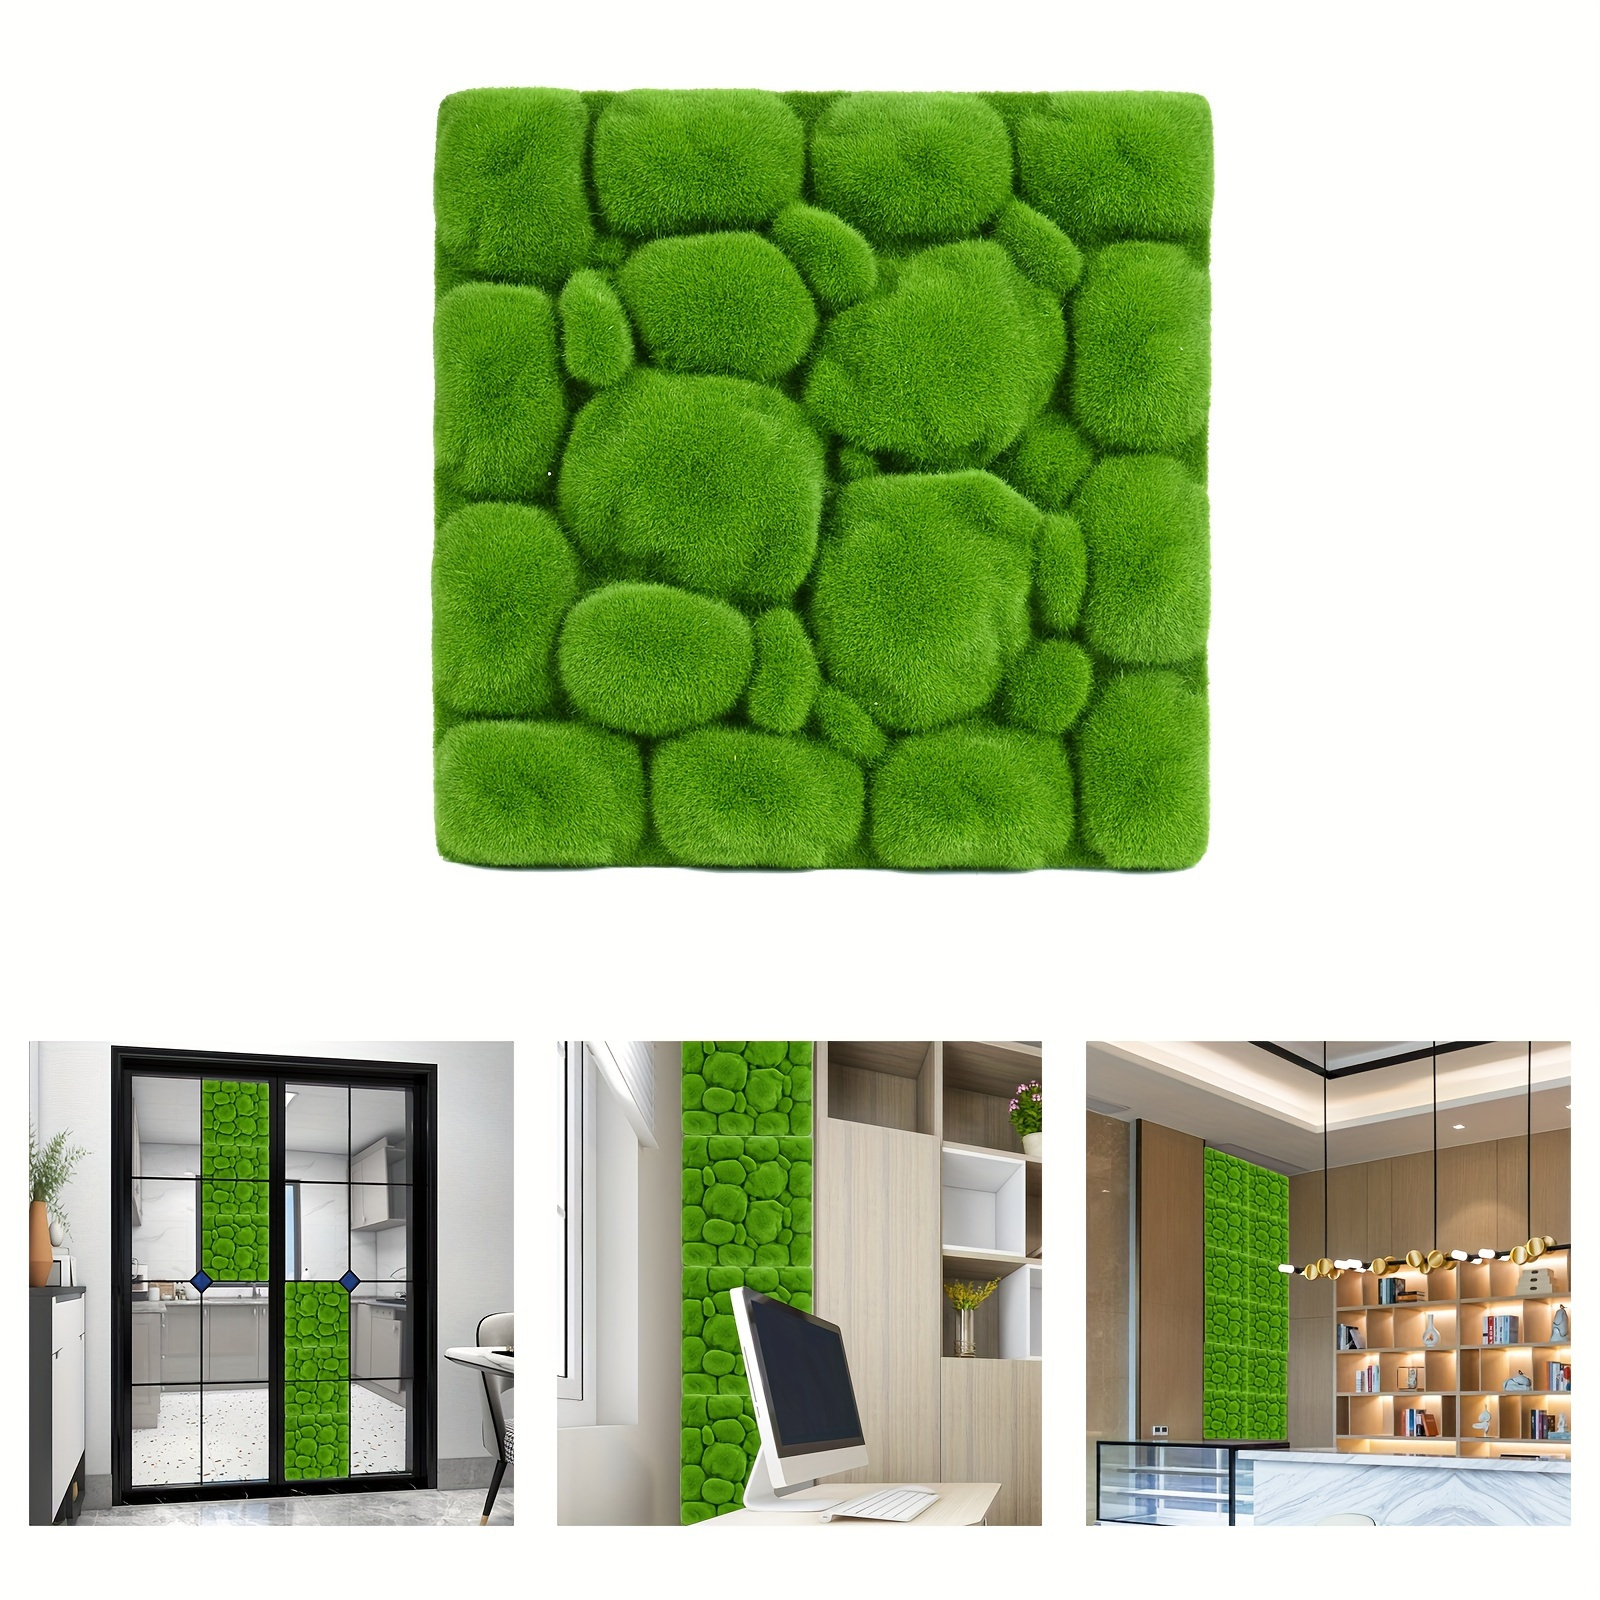 

3pcs Moss Wall Panel Simulation Green Moss Stone Foams Tile Board Diy Craft Wall Background Decoration For Home Living Room Bedroom